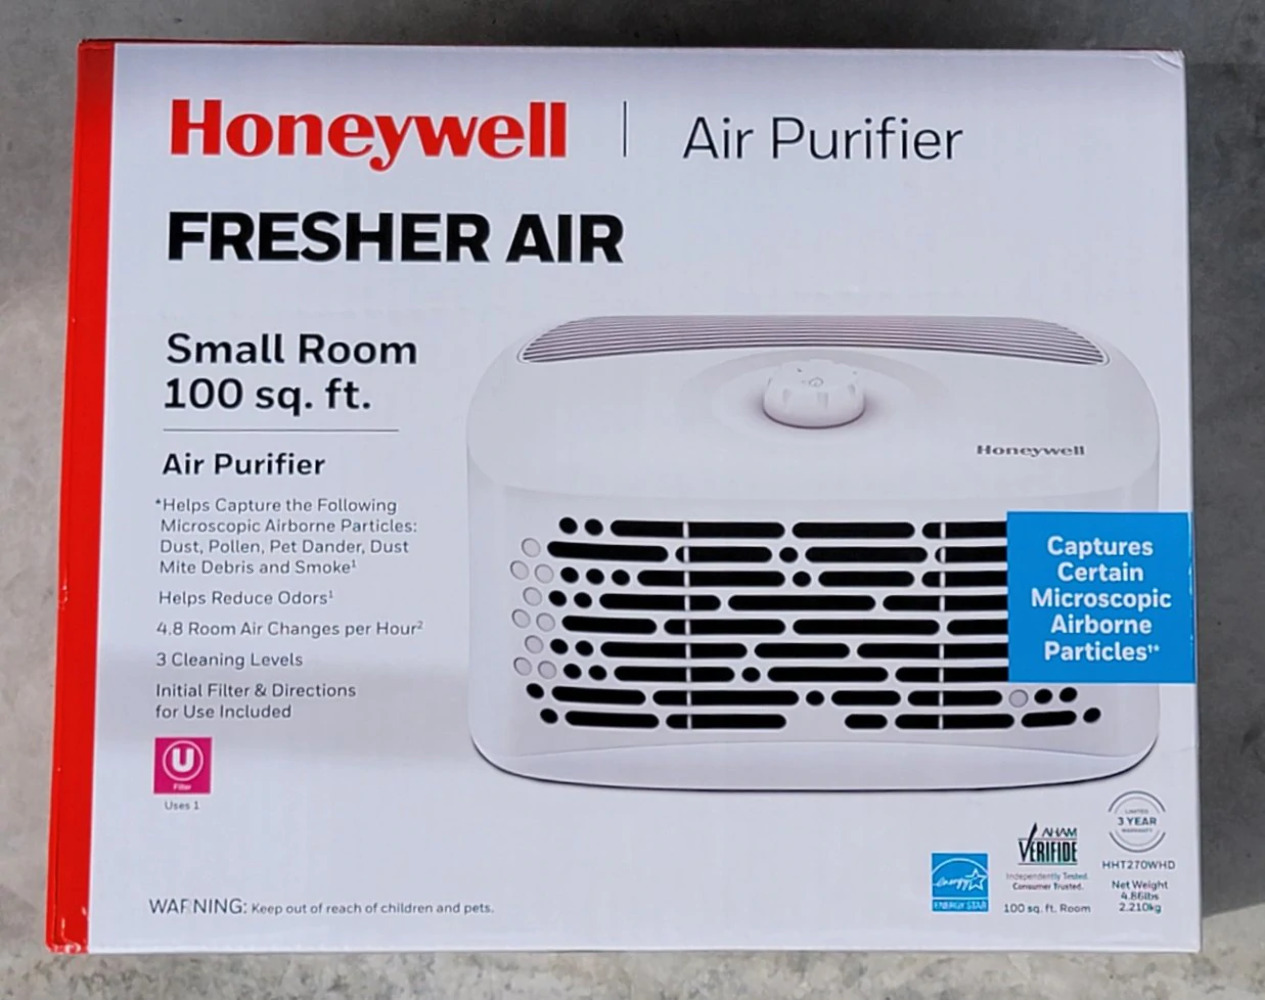 Honeywell Air Purifier HEPA Type Small Room HHT270WHDV1 Clean